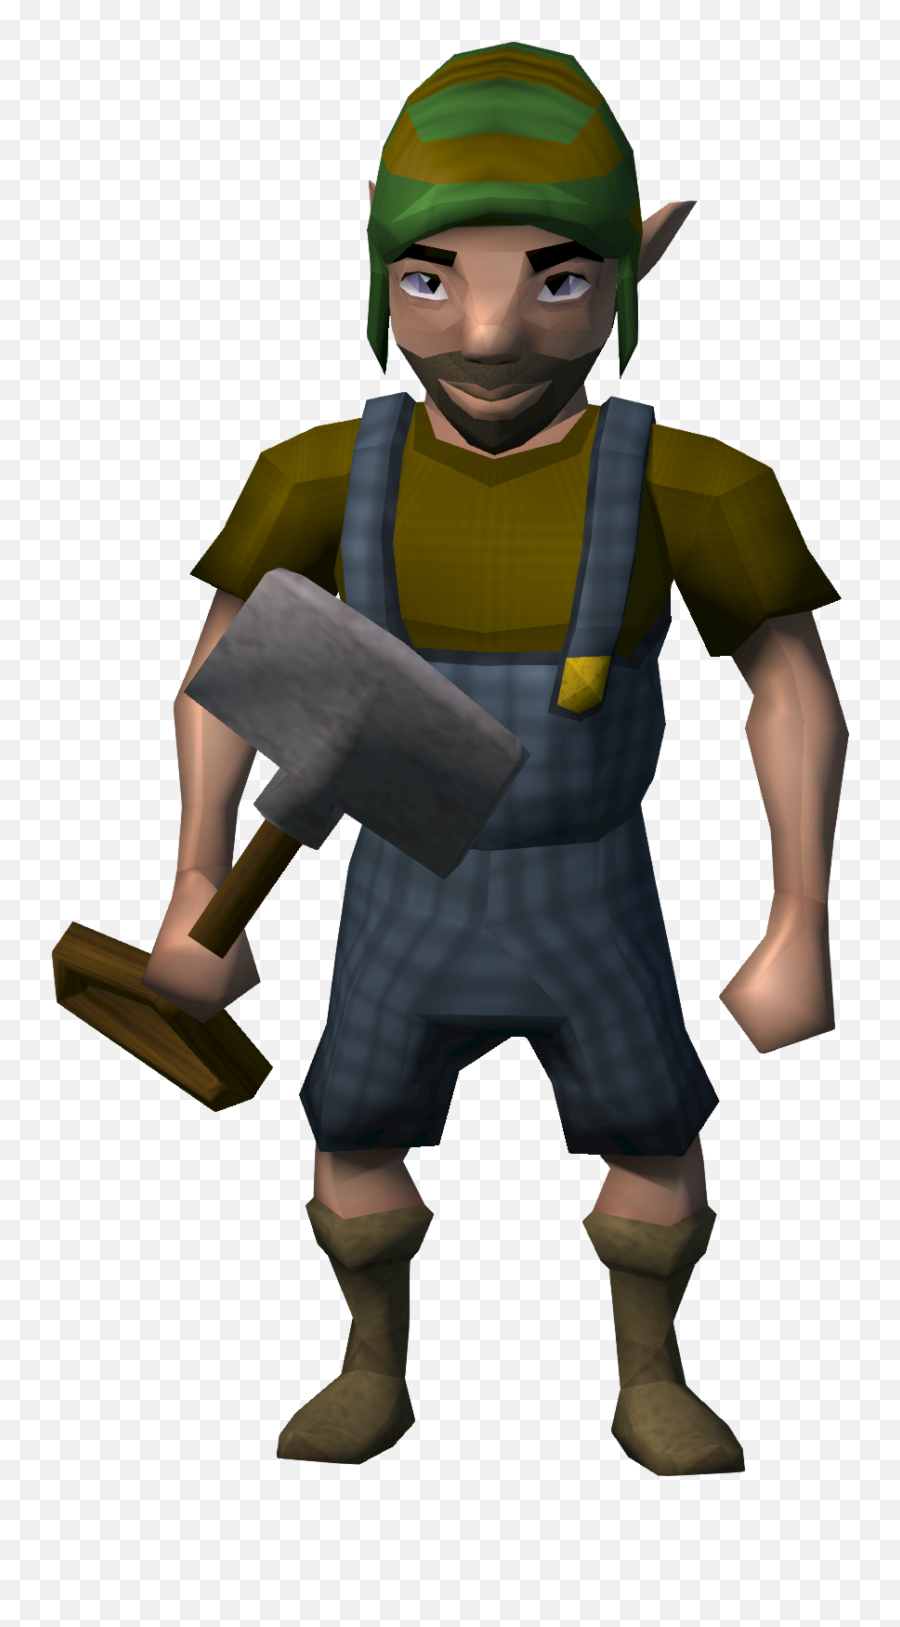 Yulf Squecks - The Runescape Wiki Soldier Png,Gnome Meme Png